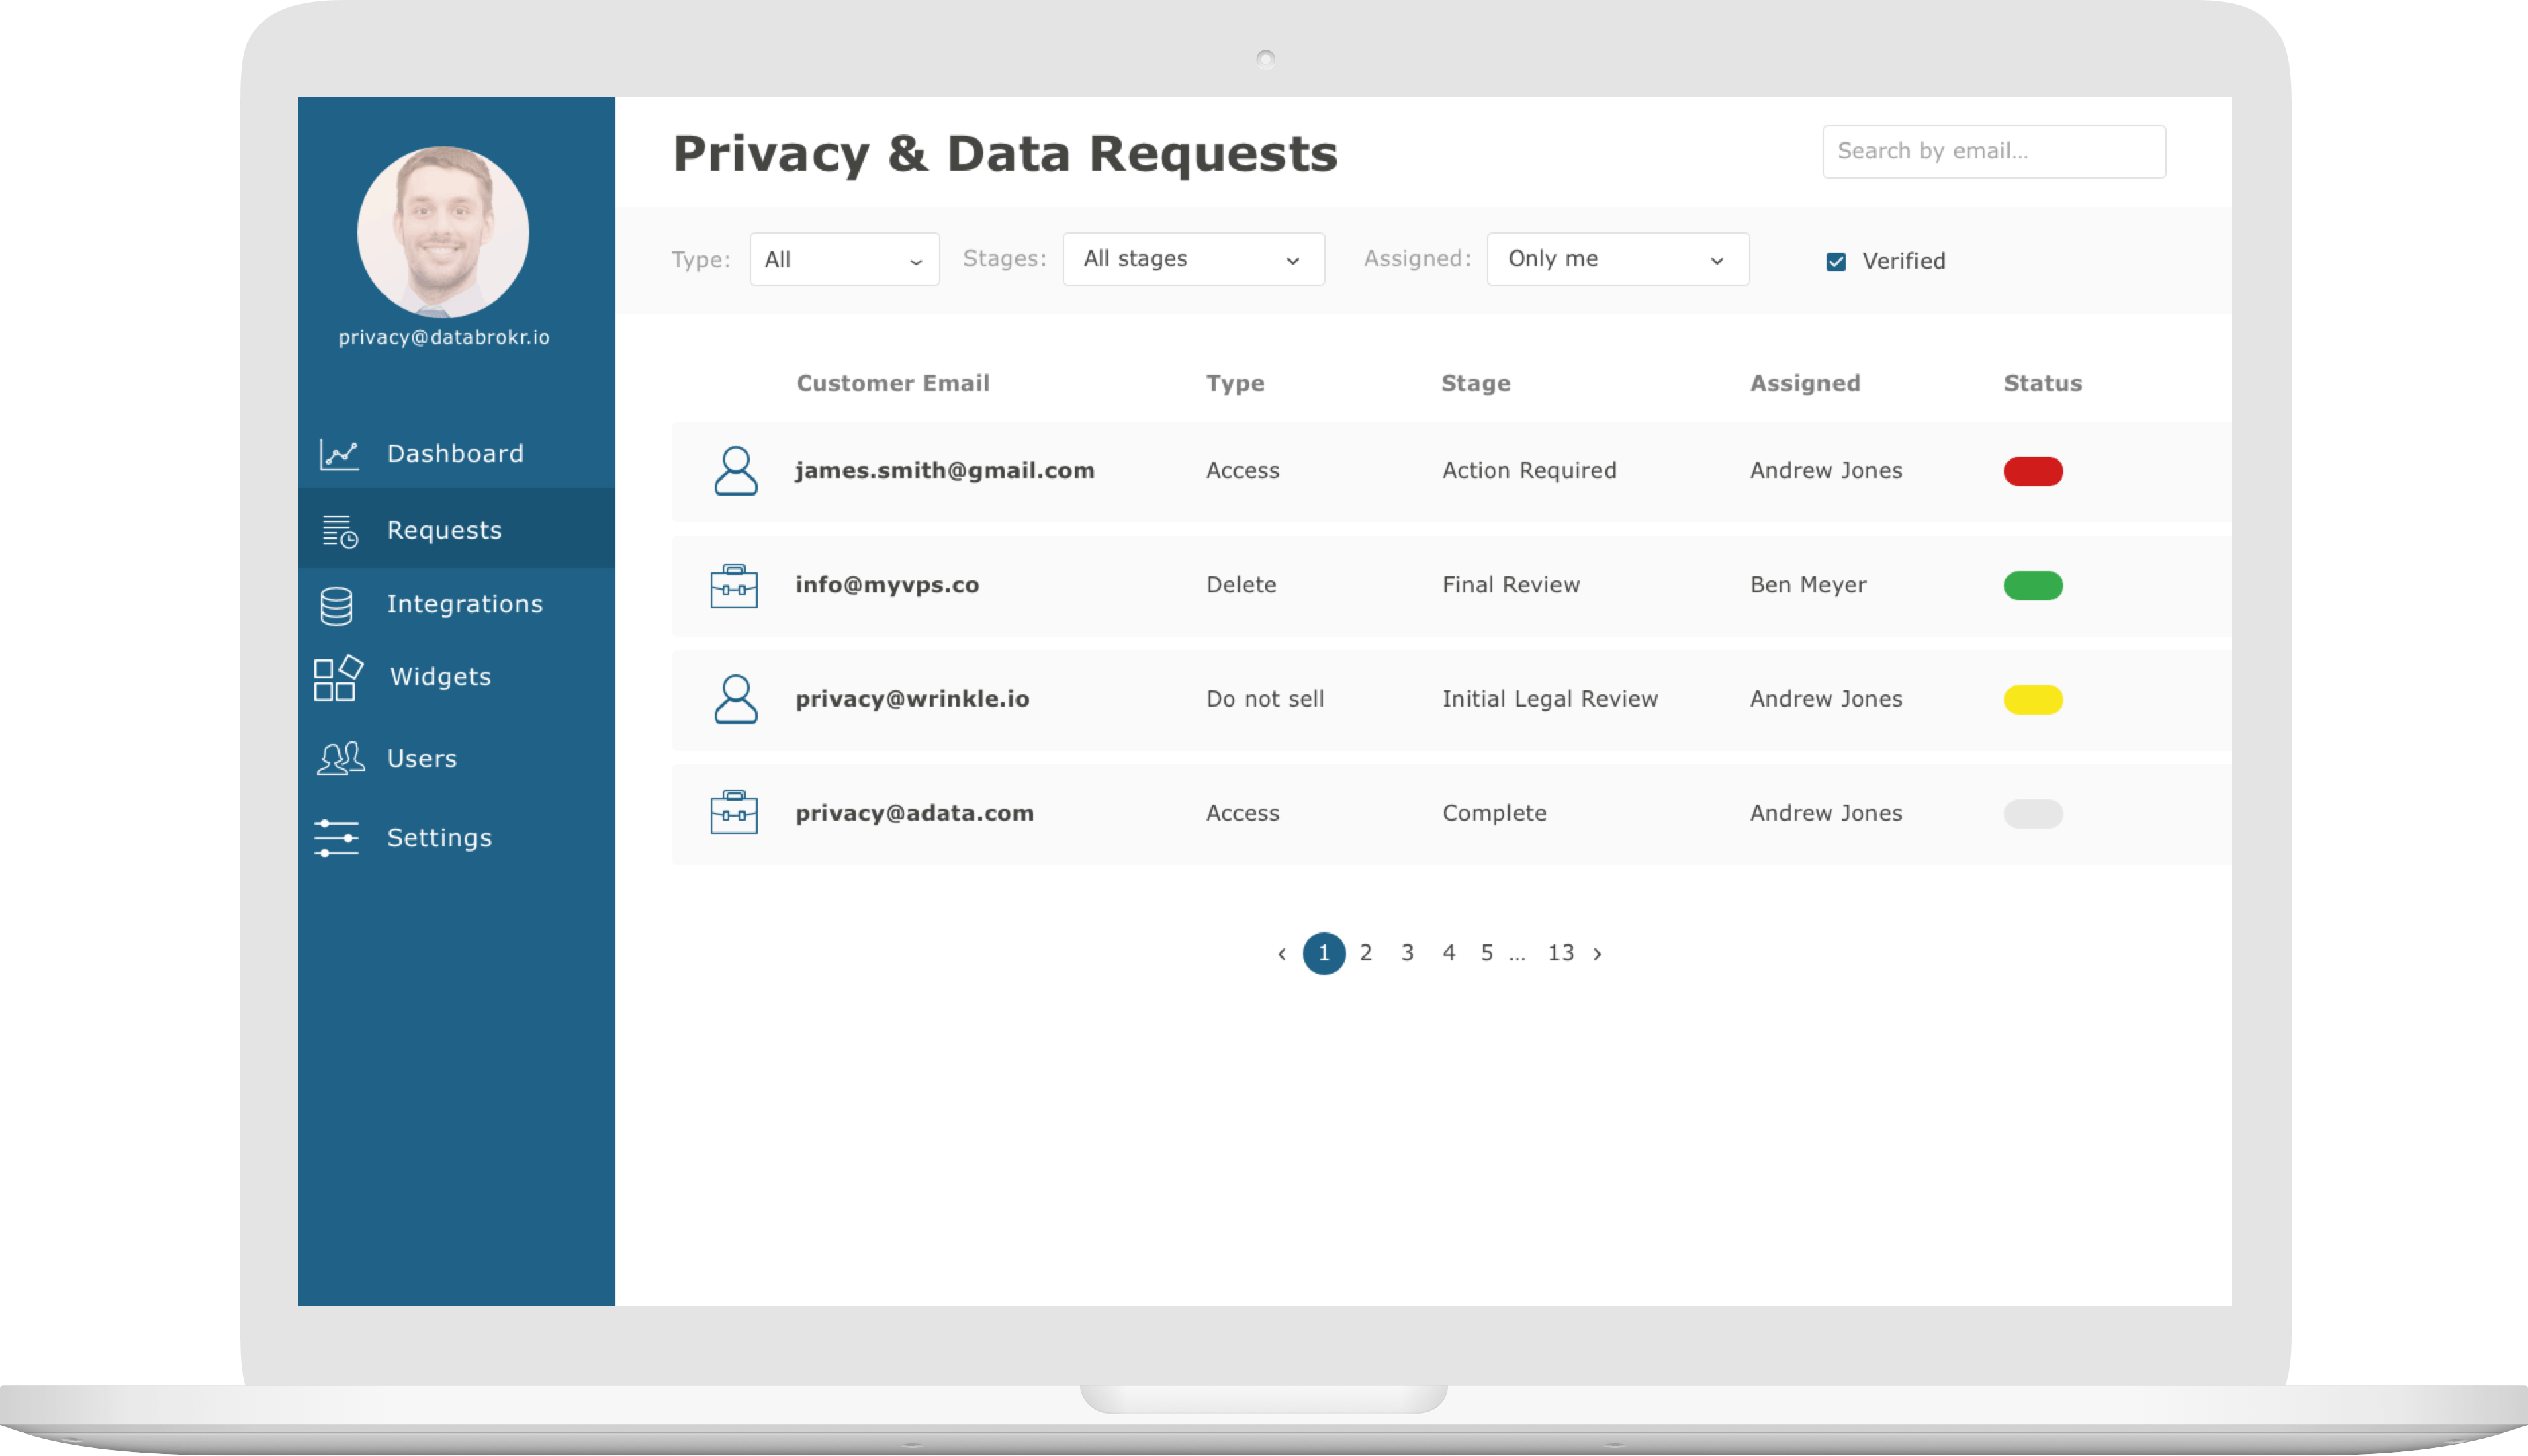 Opsware's Privacy Request